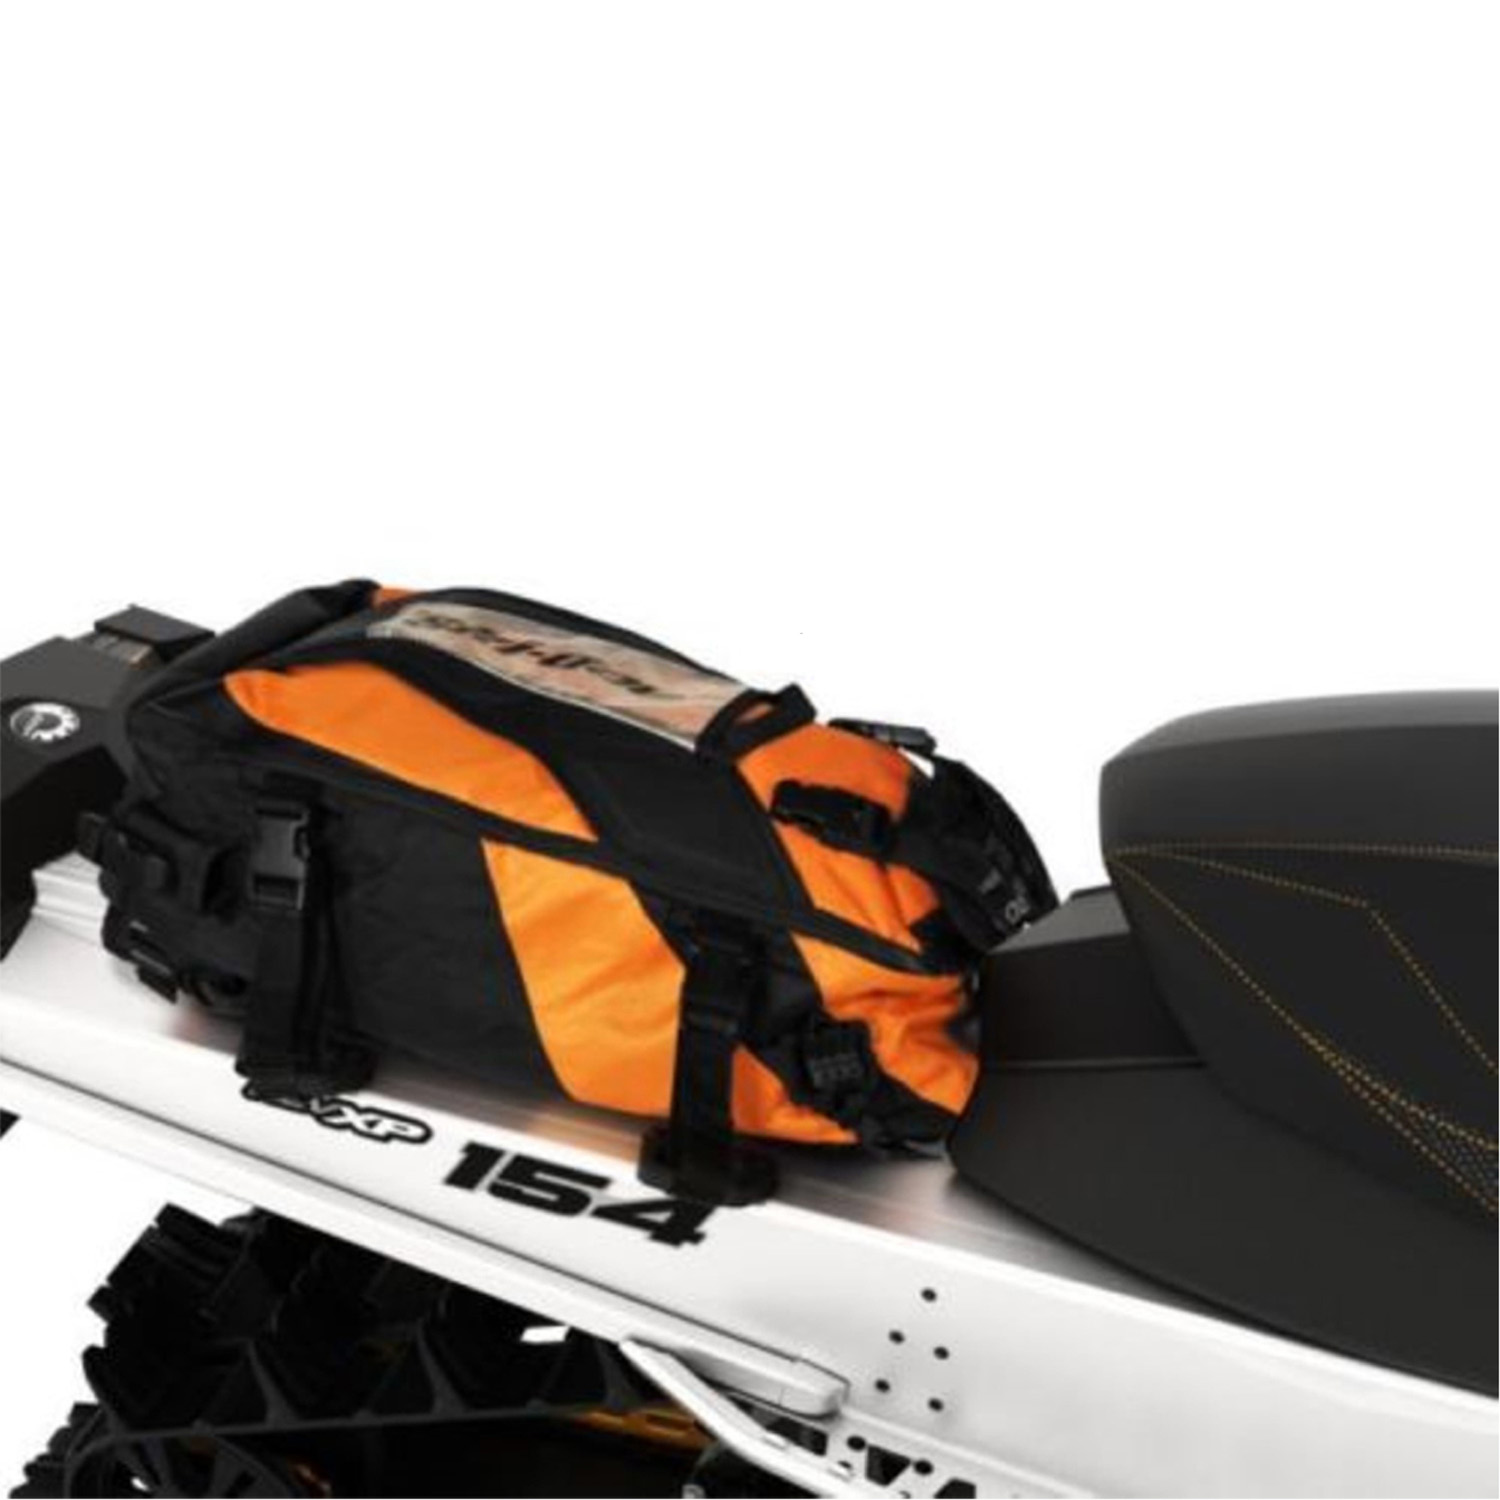 Ski-Doo New OEM Branded 28 Liter Tunnel Backpack With LinQ Soft Strap, 860200940 - image 2 of 3